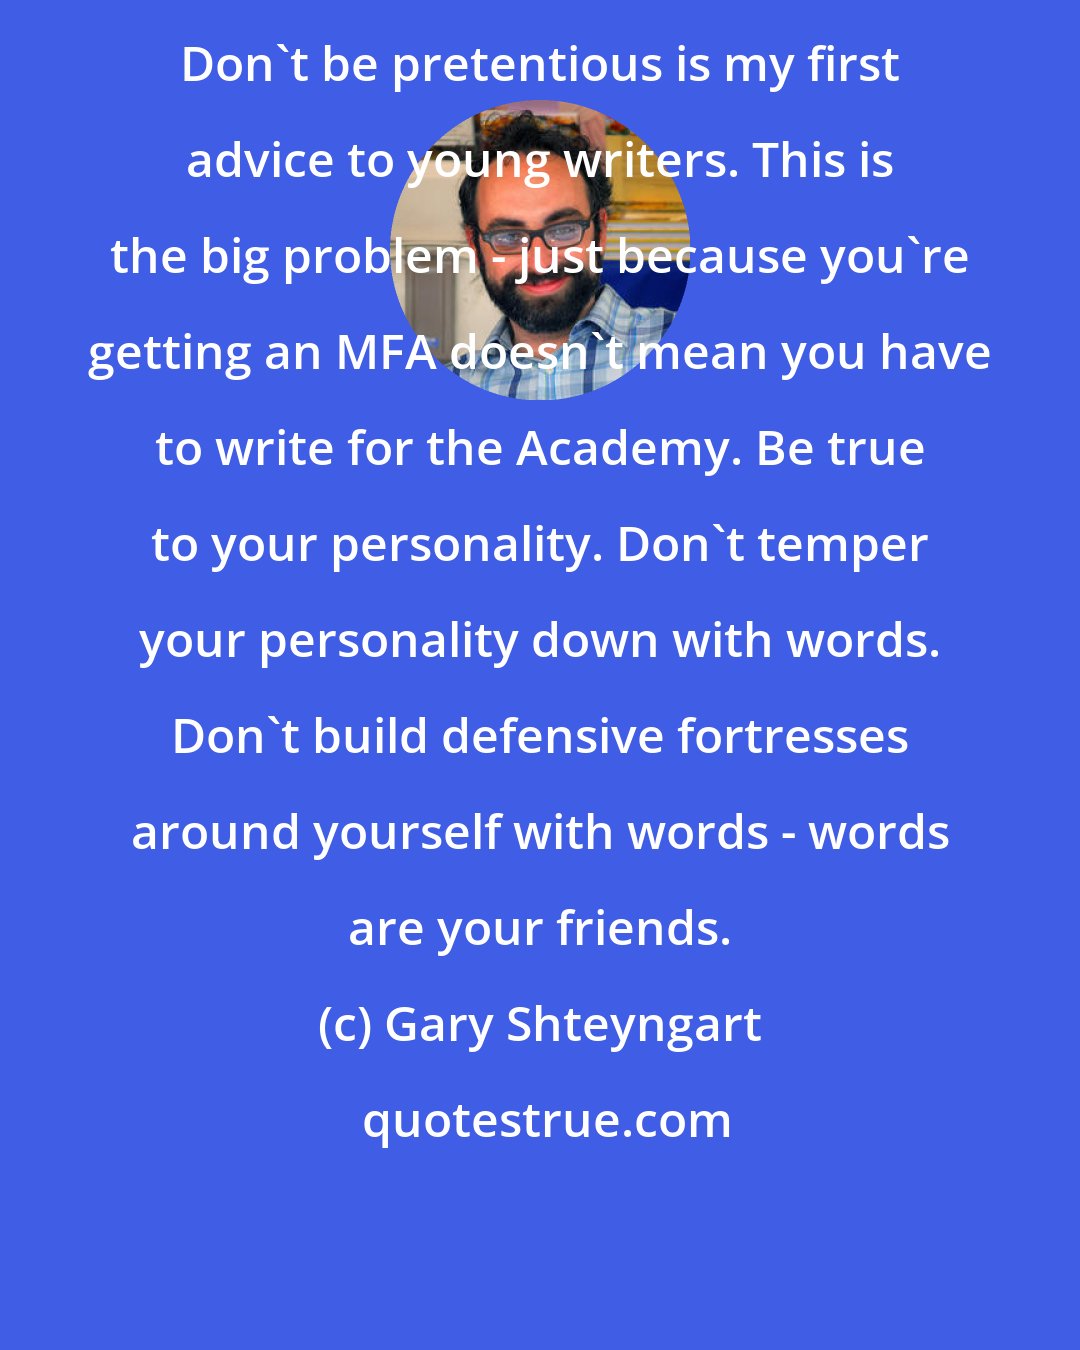 Gary Shteyngart: Don't be pretentious is my first advice to young writers. This is the big problem - just because you're getting an MFA doesn't mean you have to write for the Academy. Be true to your personality. Don't temper your personality down with words. Don't build defensive fortresses around yourself with words - words are your friends.